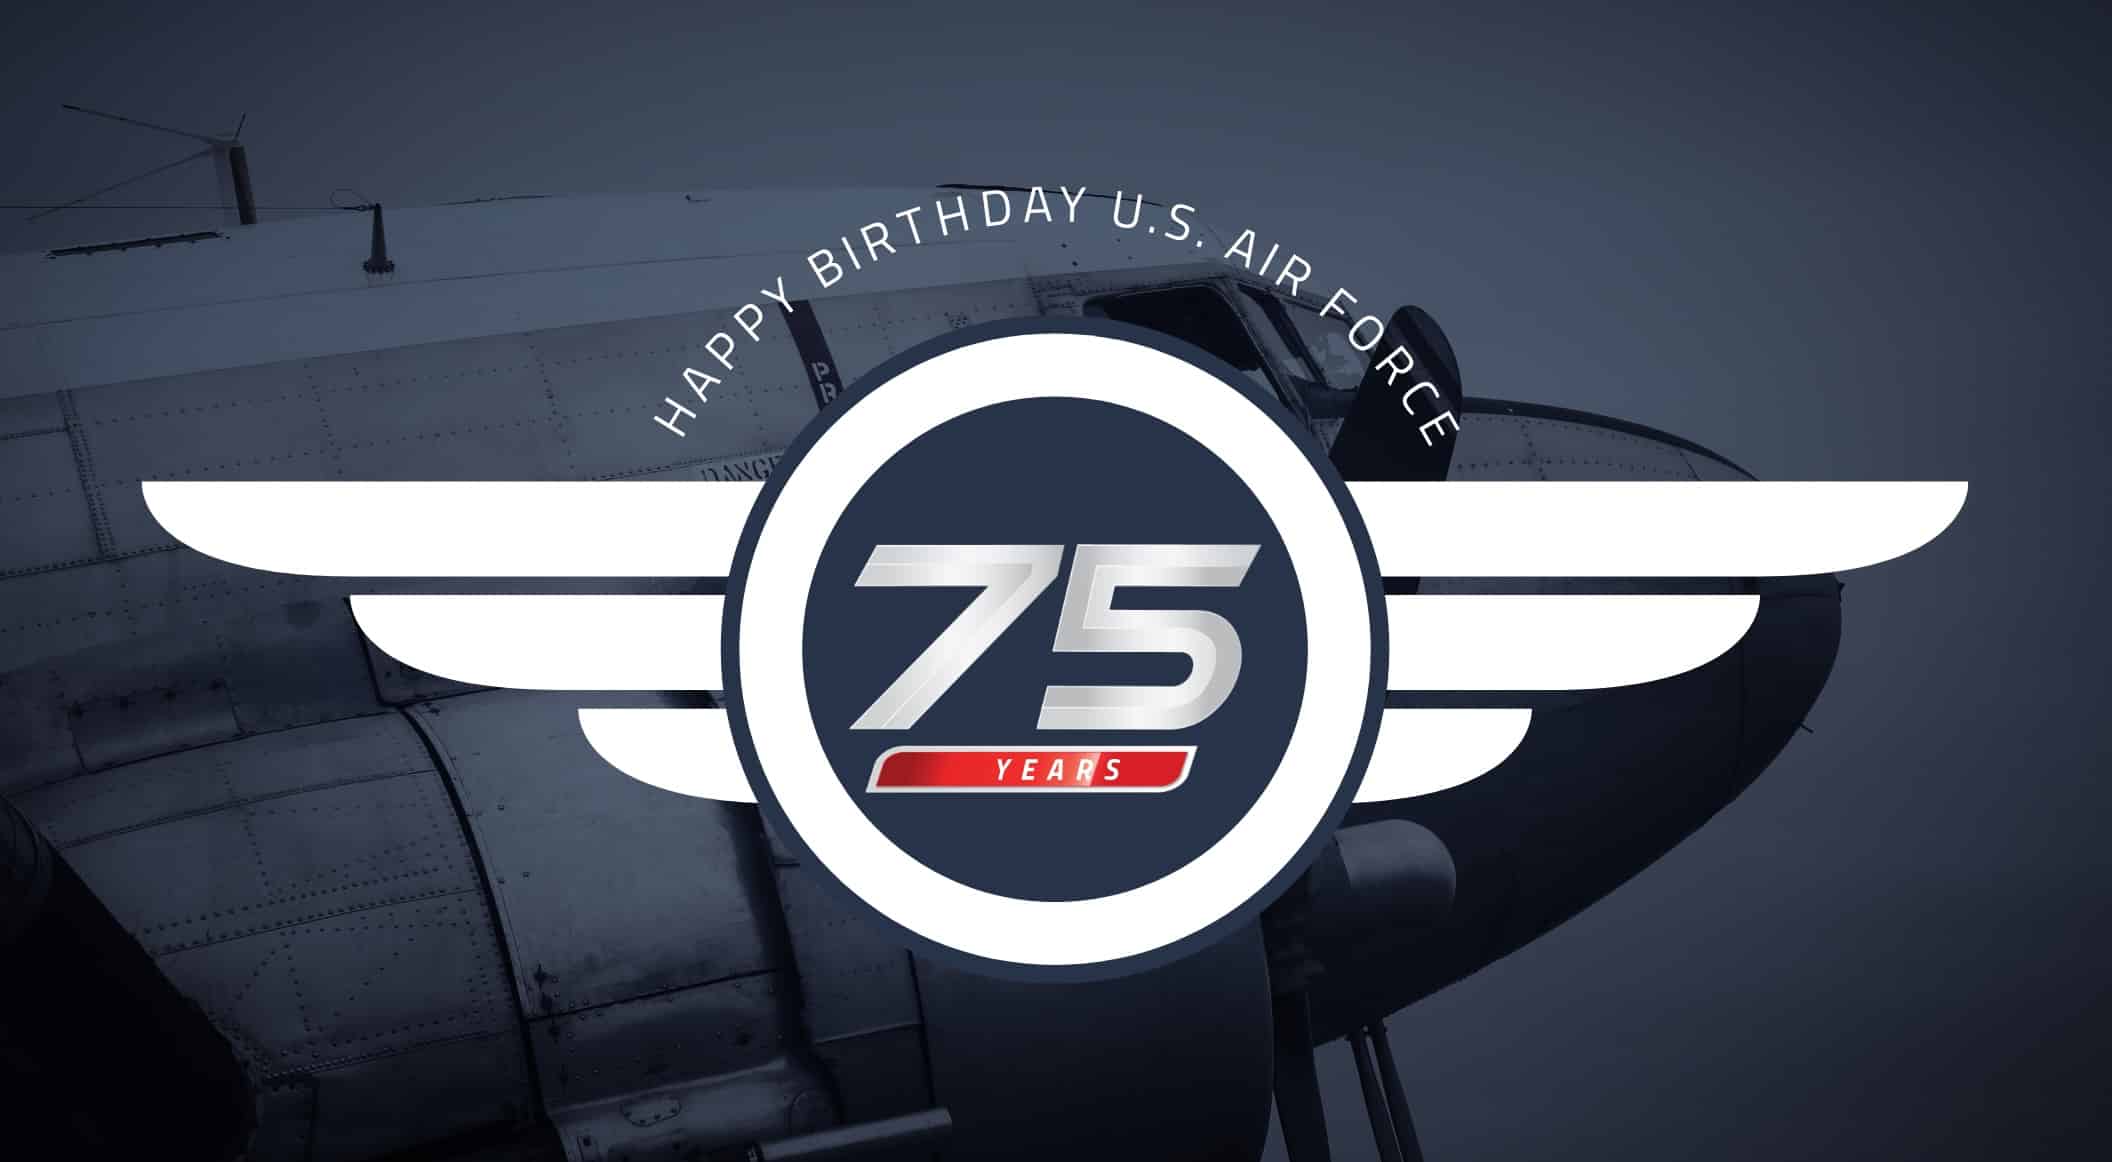 Happy 75th birthday to the U.S. Air Force